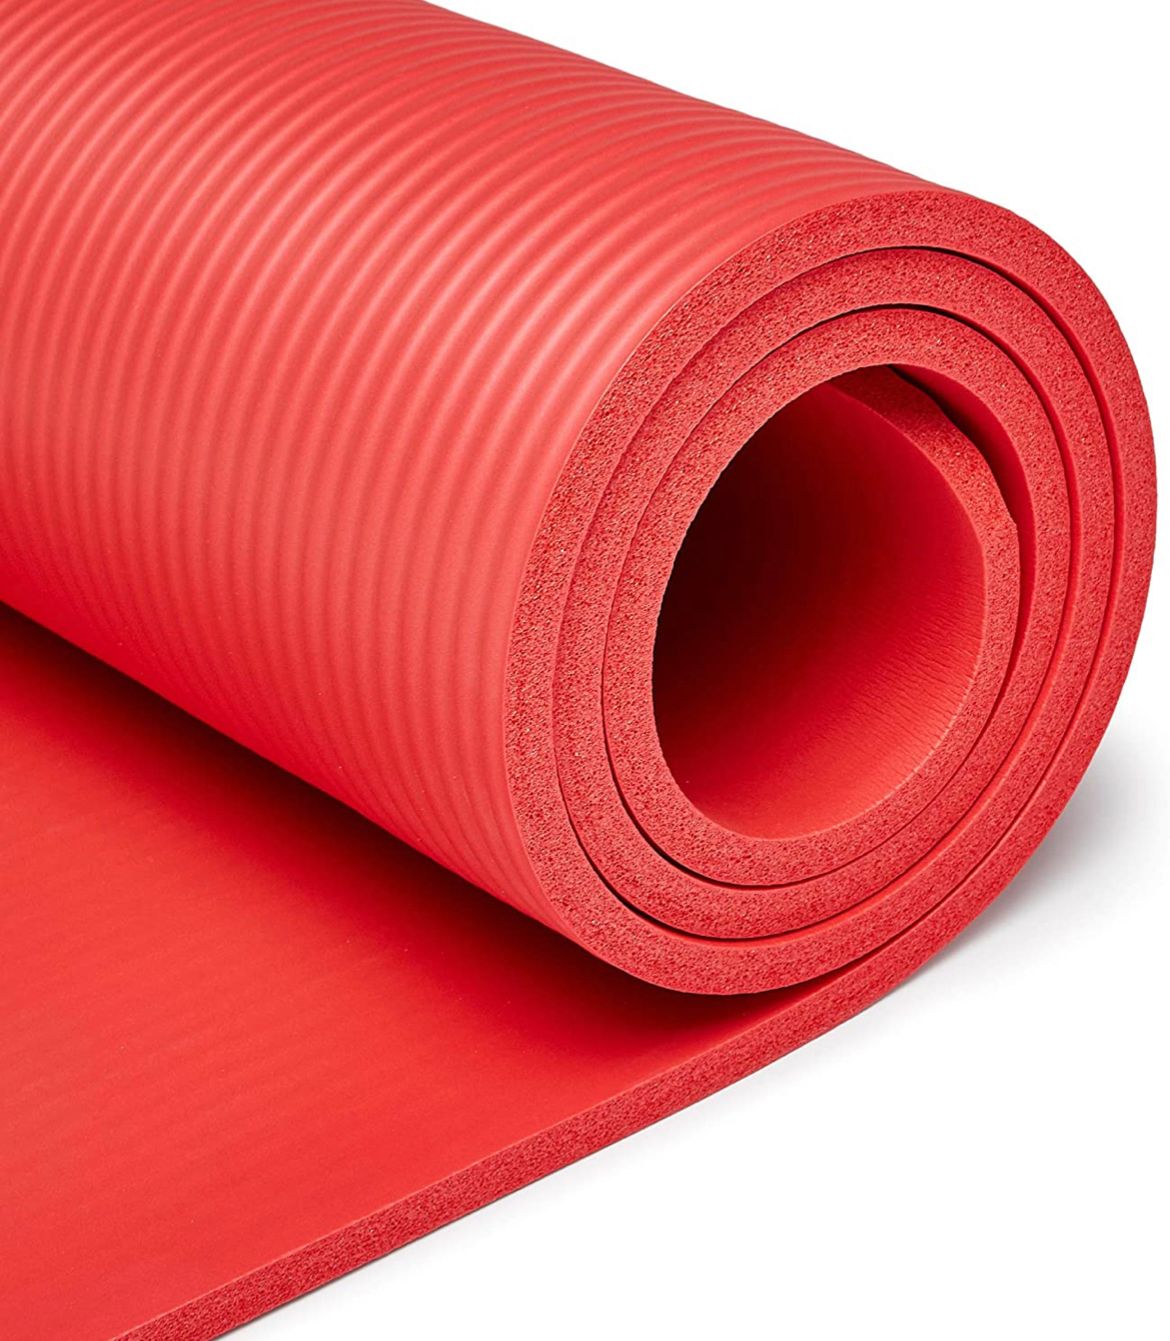 Rubber Yoga Mats at Rs 40/piece, रबर योग मैट in New Delhi